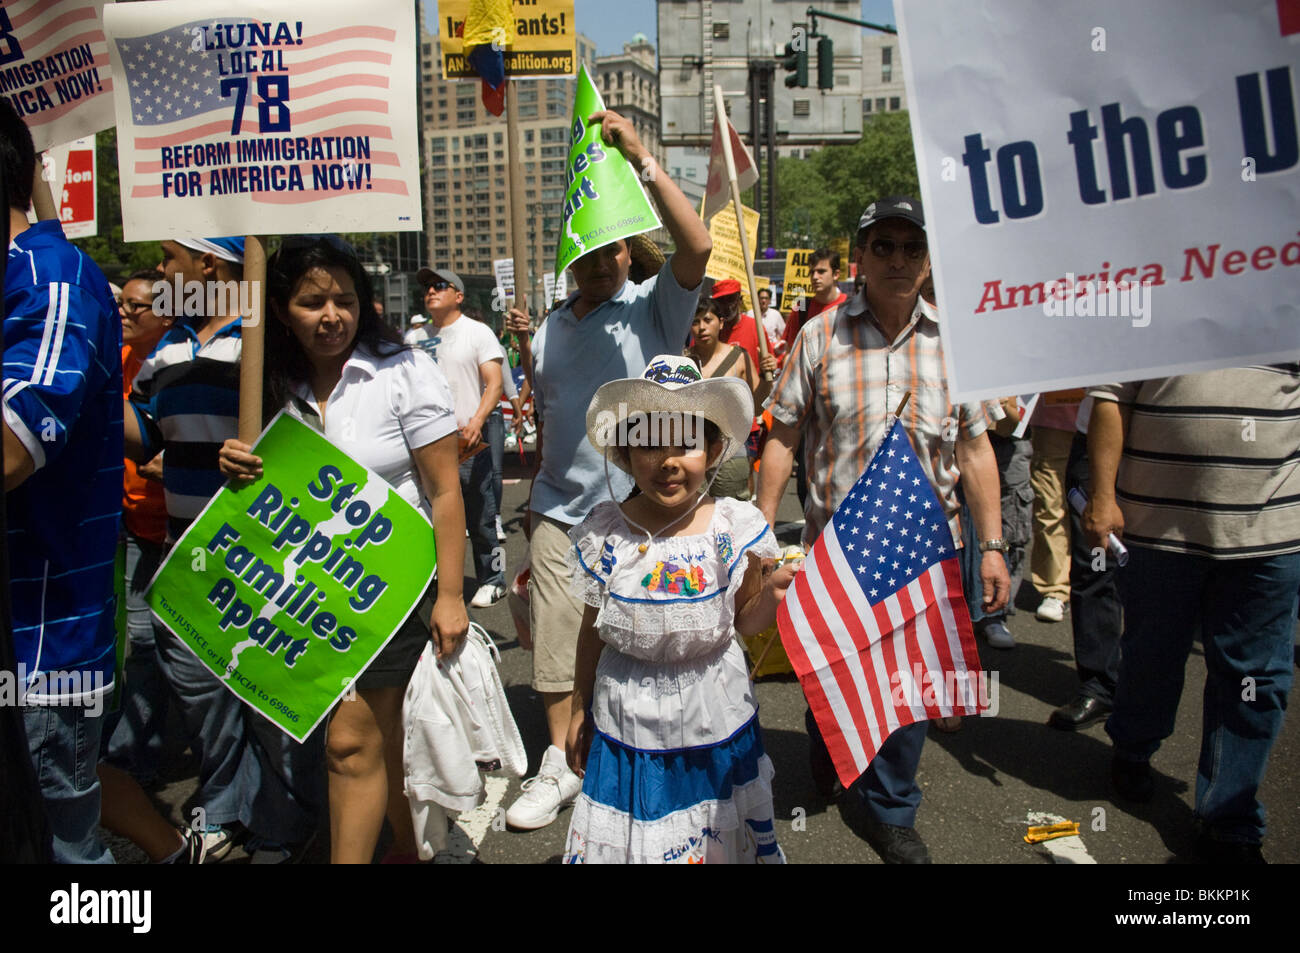 Union members, immigrants, and their supporters rally against Arizona Bill SB 1070 in Lower Manhattan in New York Stock Photo